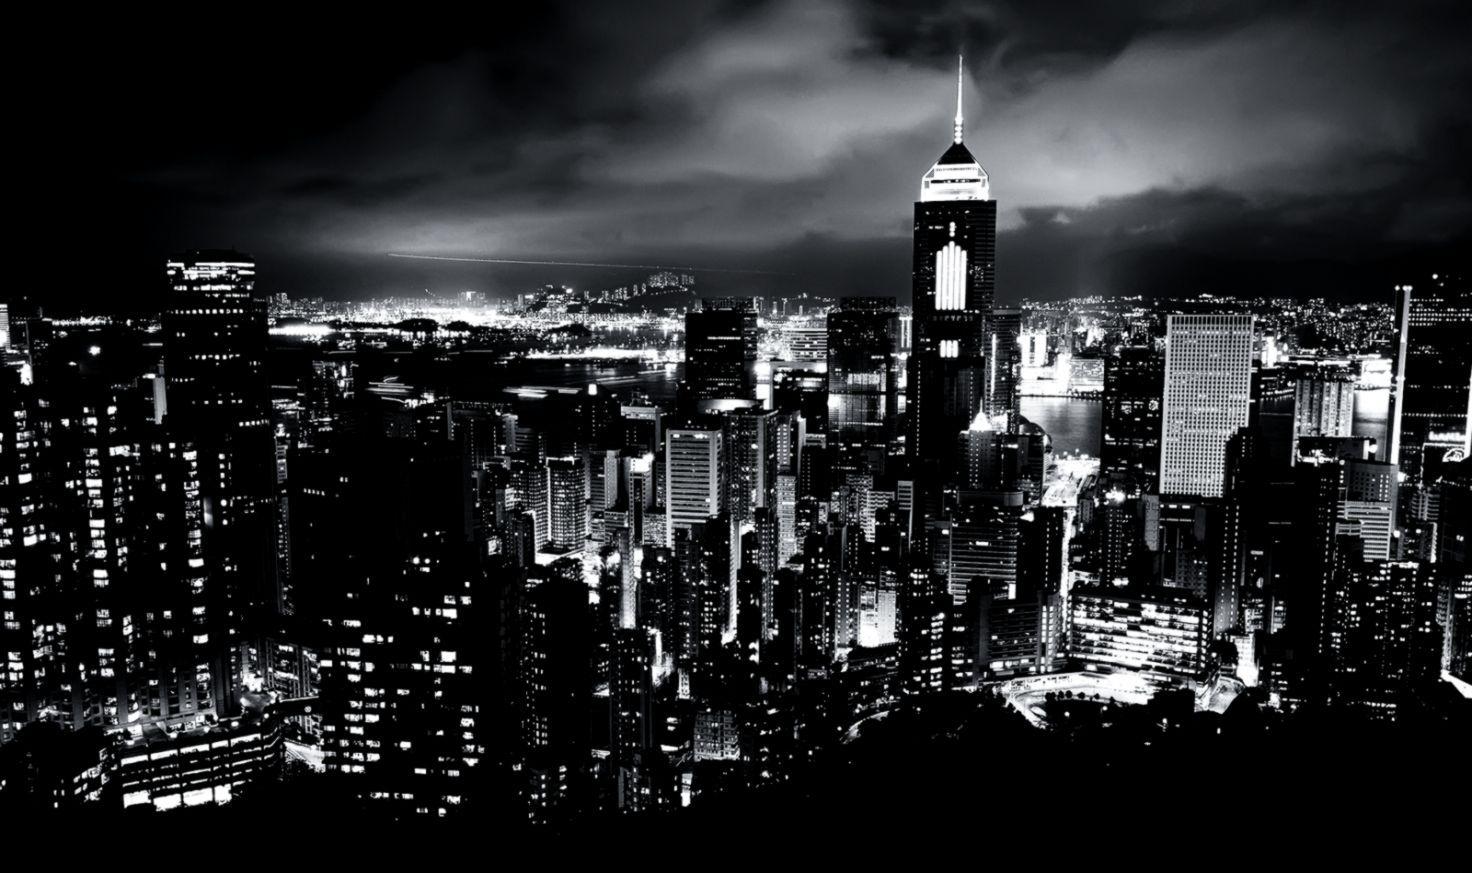 Black and White Rain City Wallpapers - Top Free Black and White Rain ...